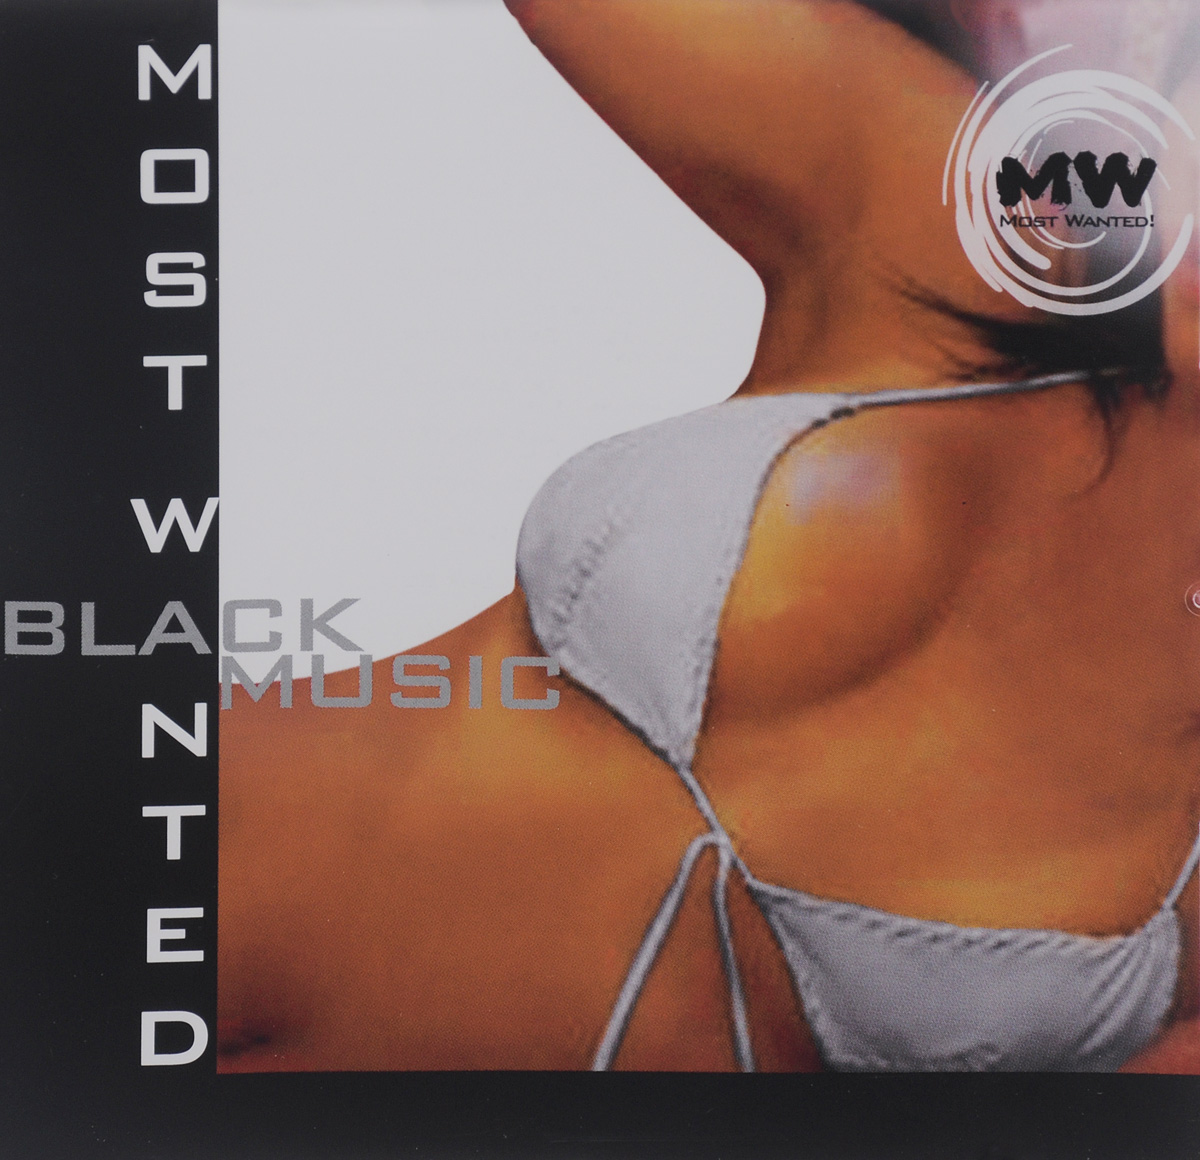 Most Wanted. Black Music